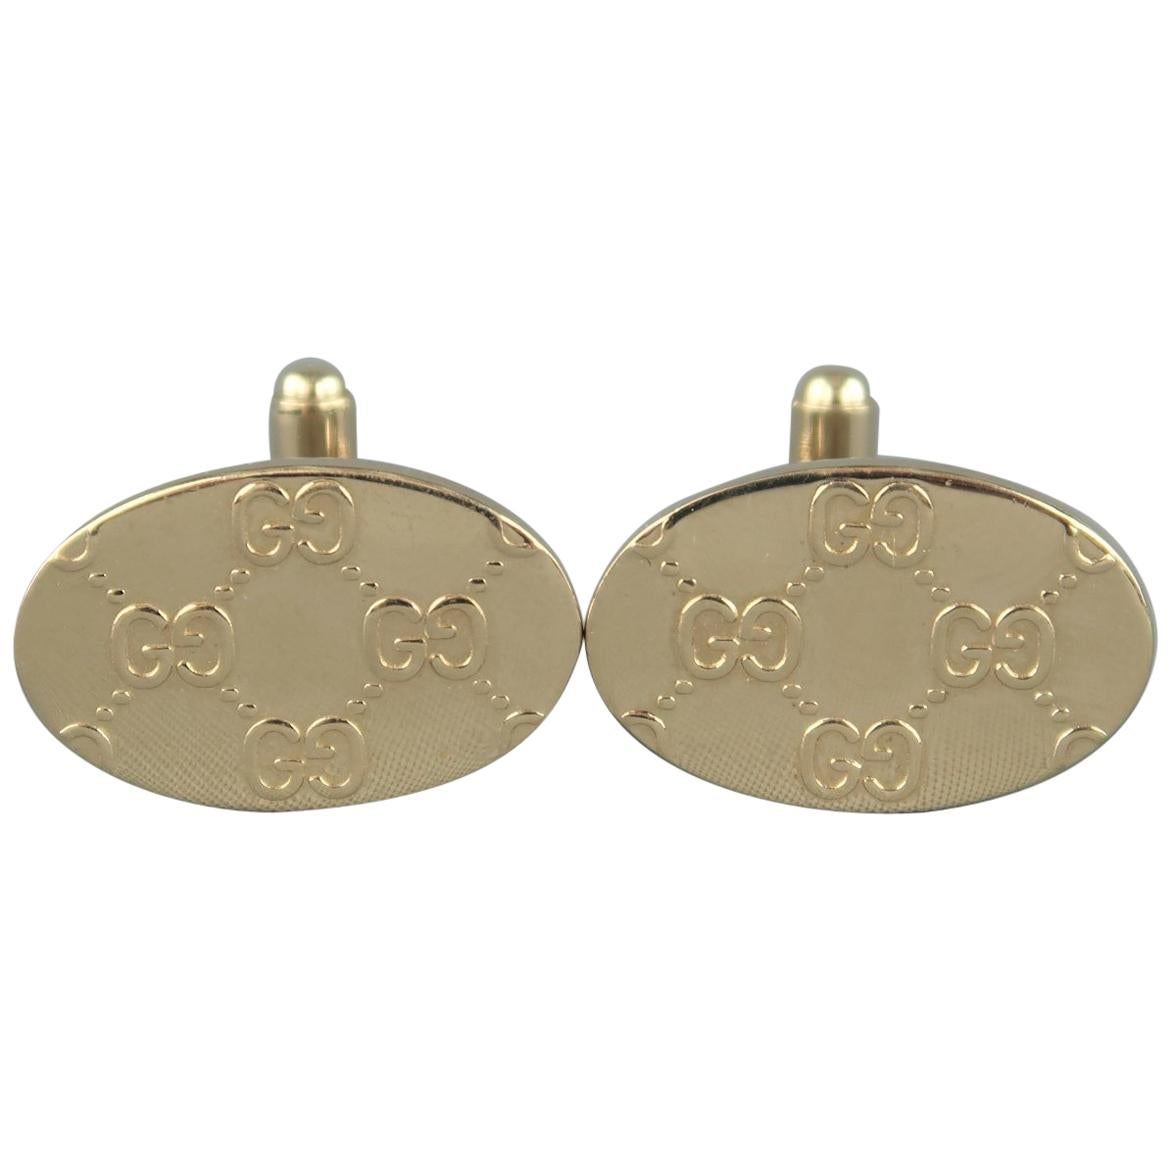 GUCCI by TOM FORD 2000 Light Gold Tone Metal Guccissima Cuff Links